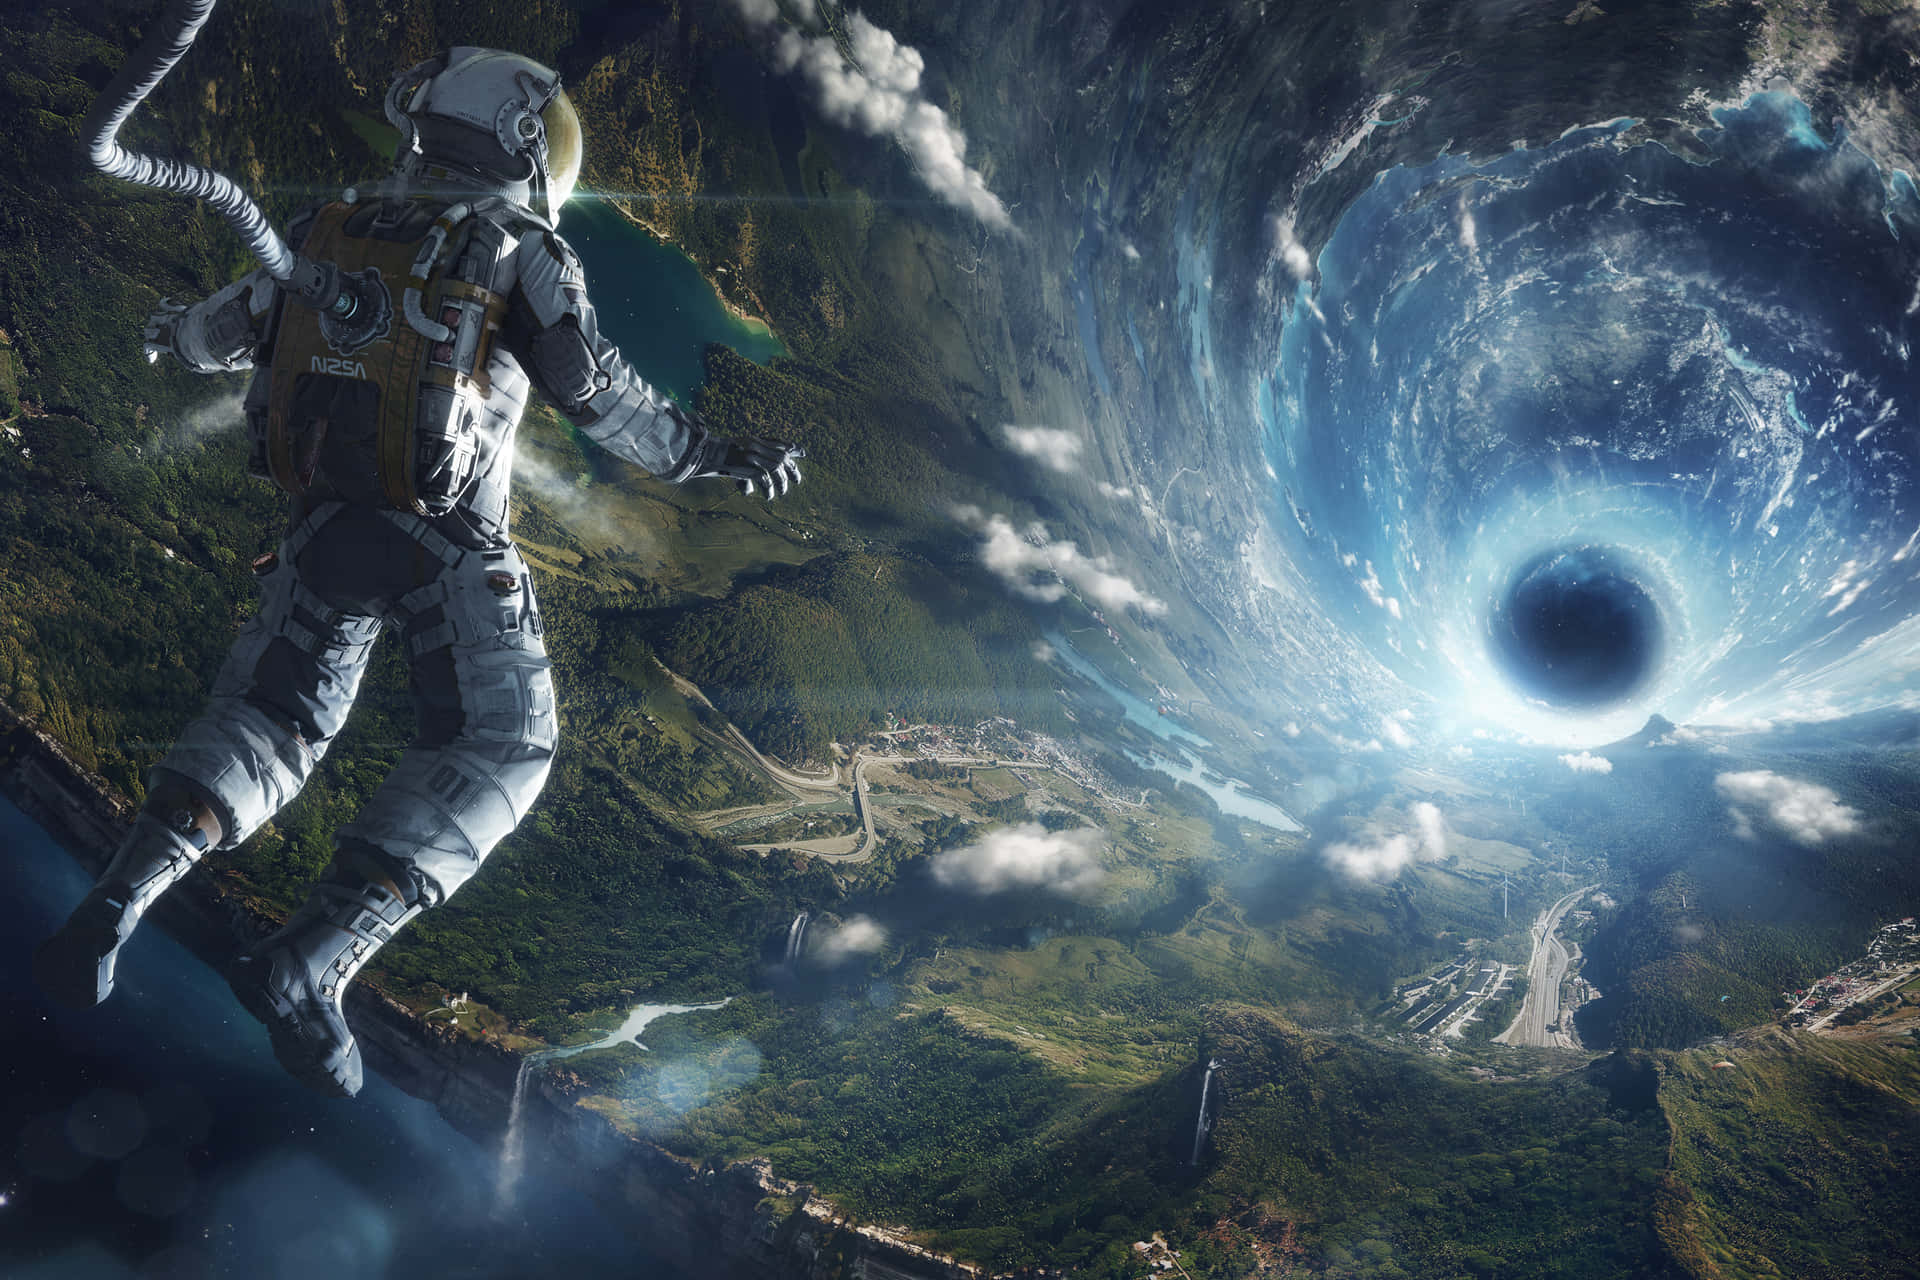 A breathtaking view of an astronaut in space Wallpaper